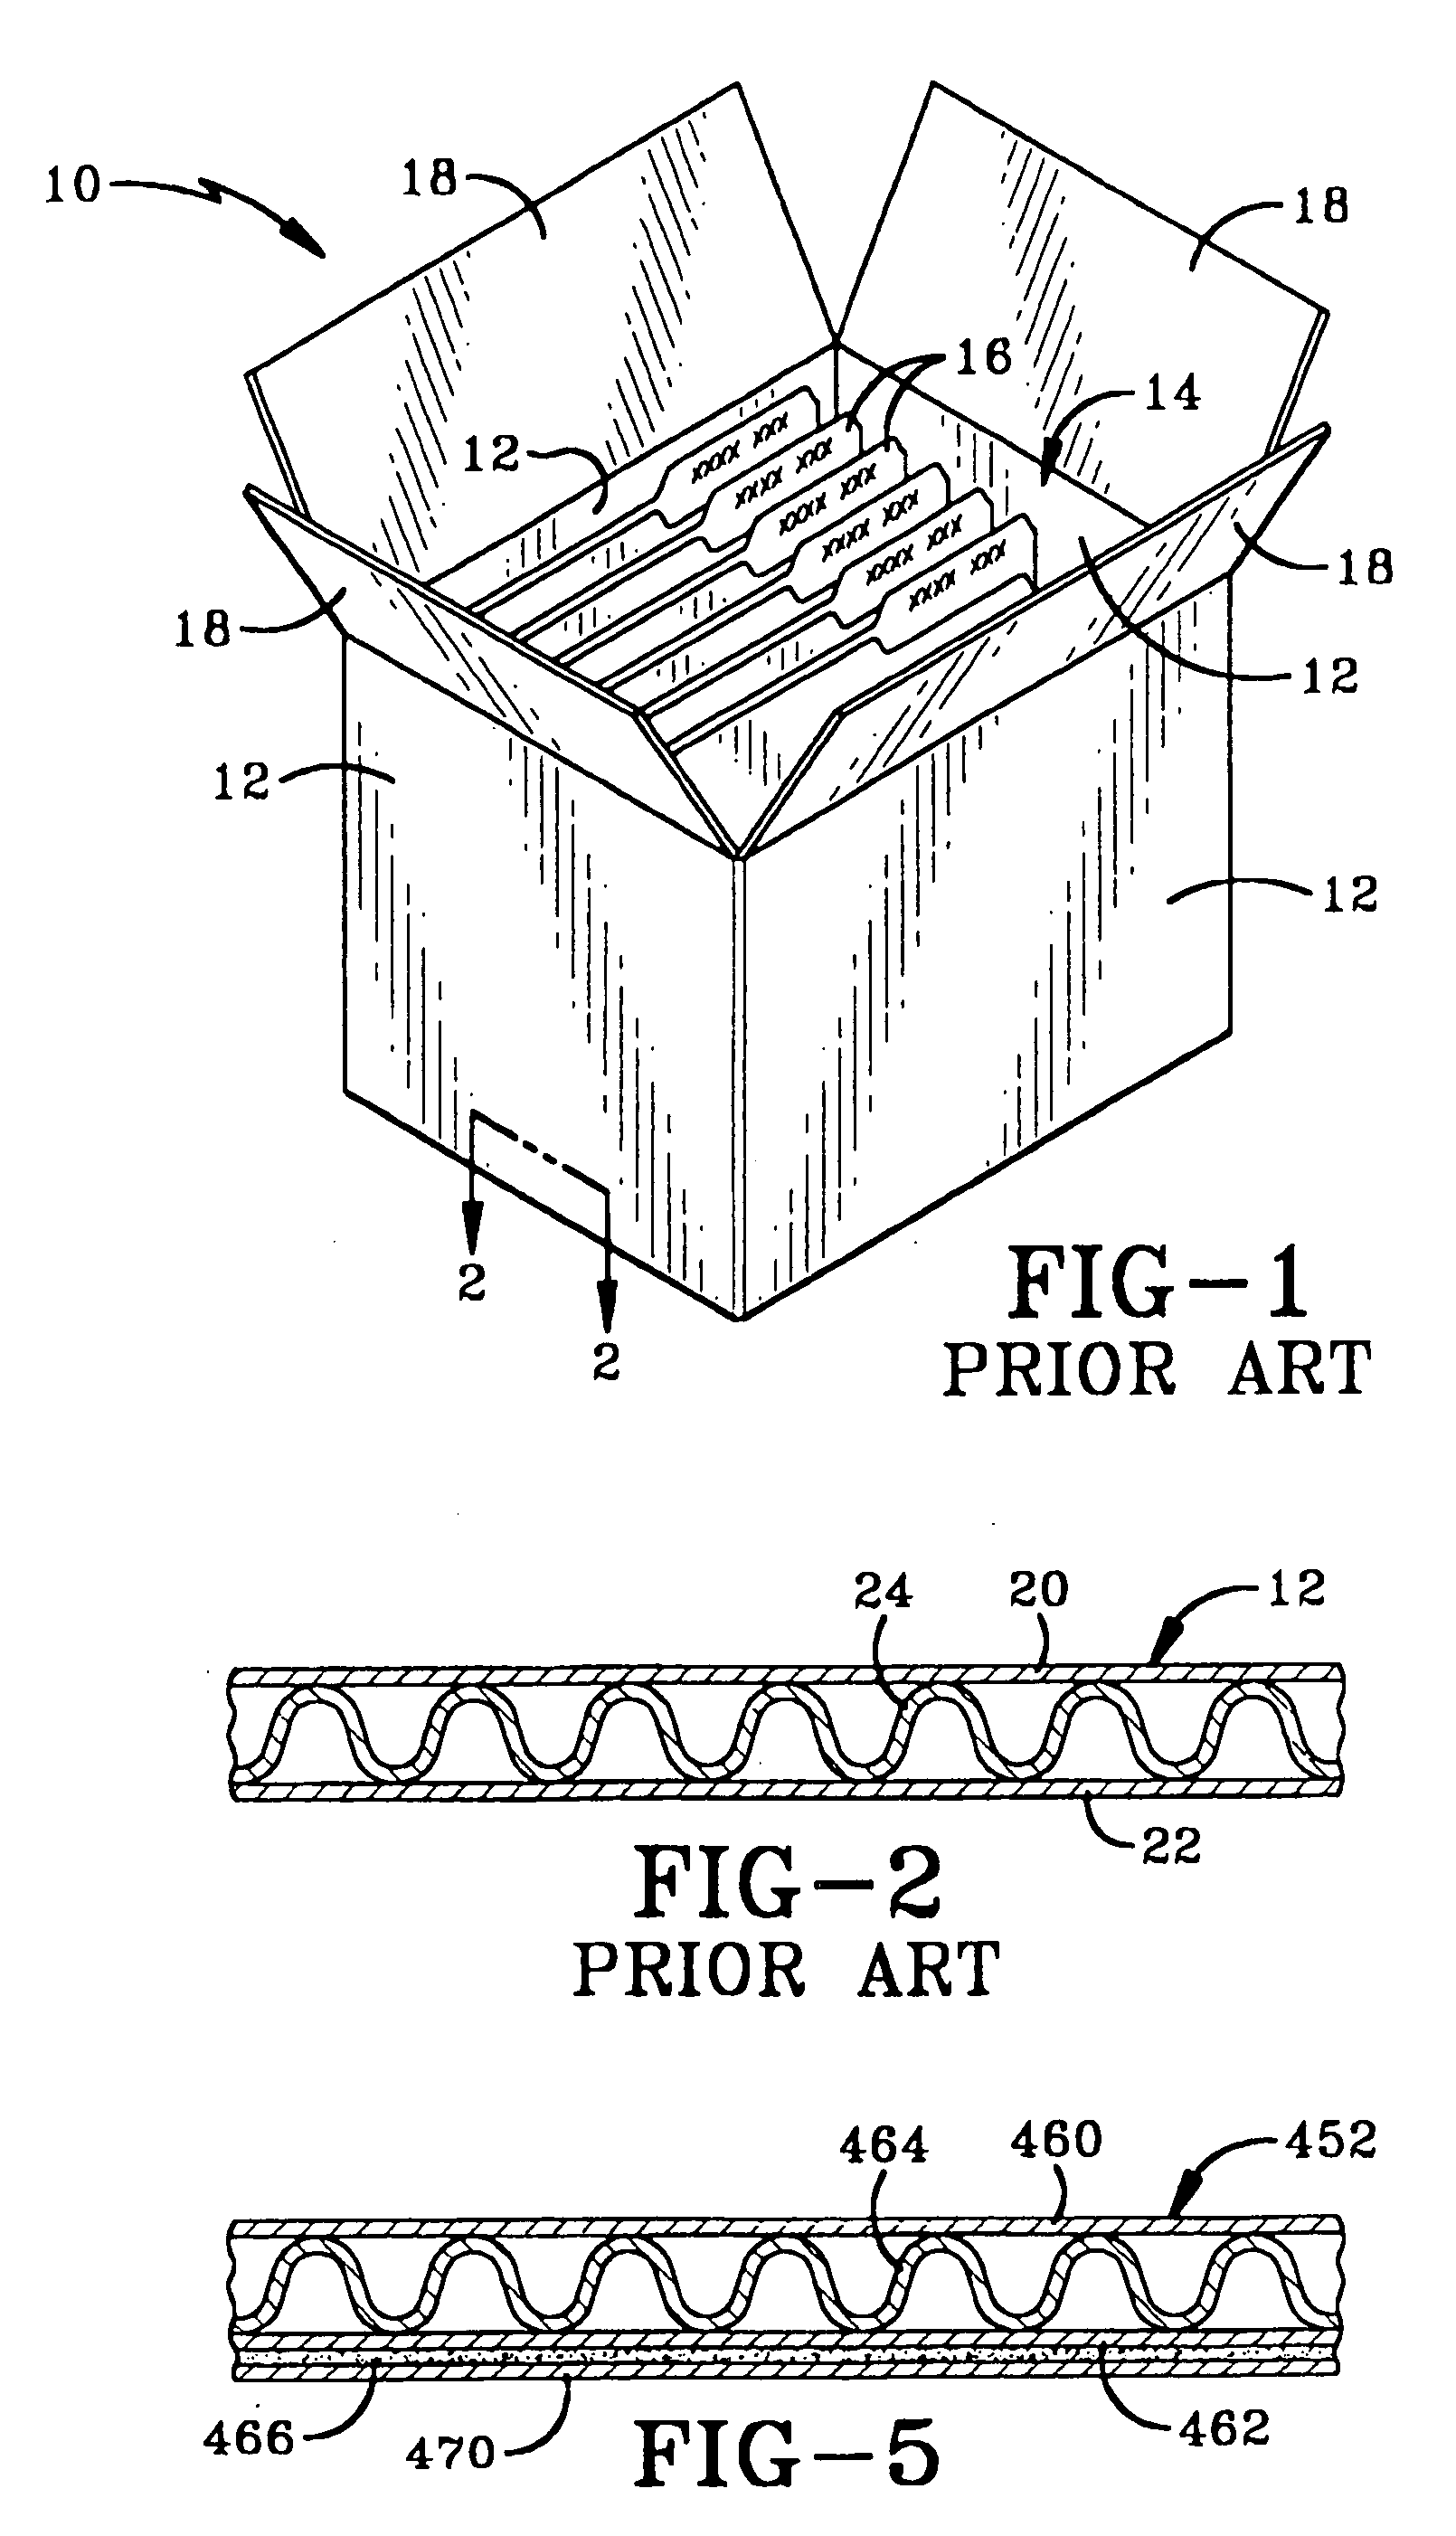 Storage box having protective materials incorporated therein